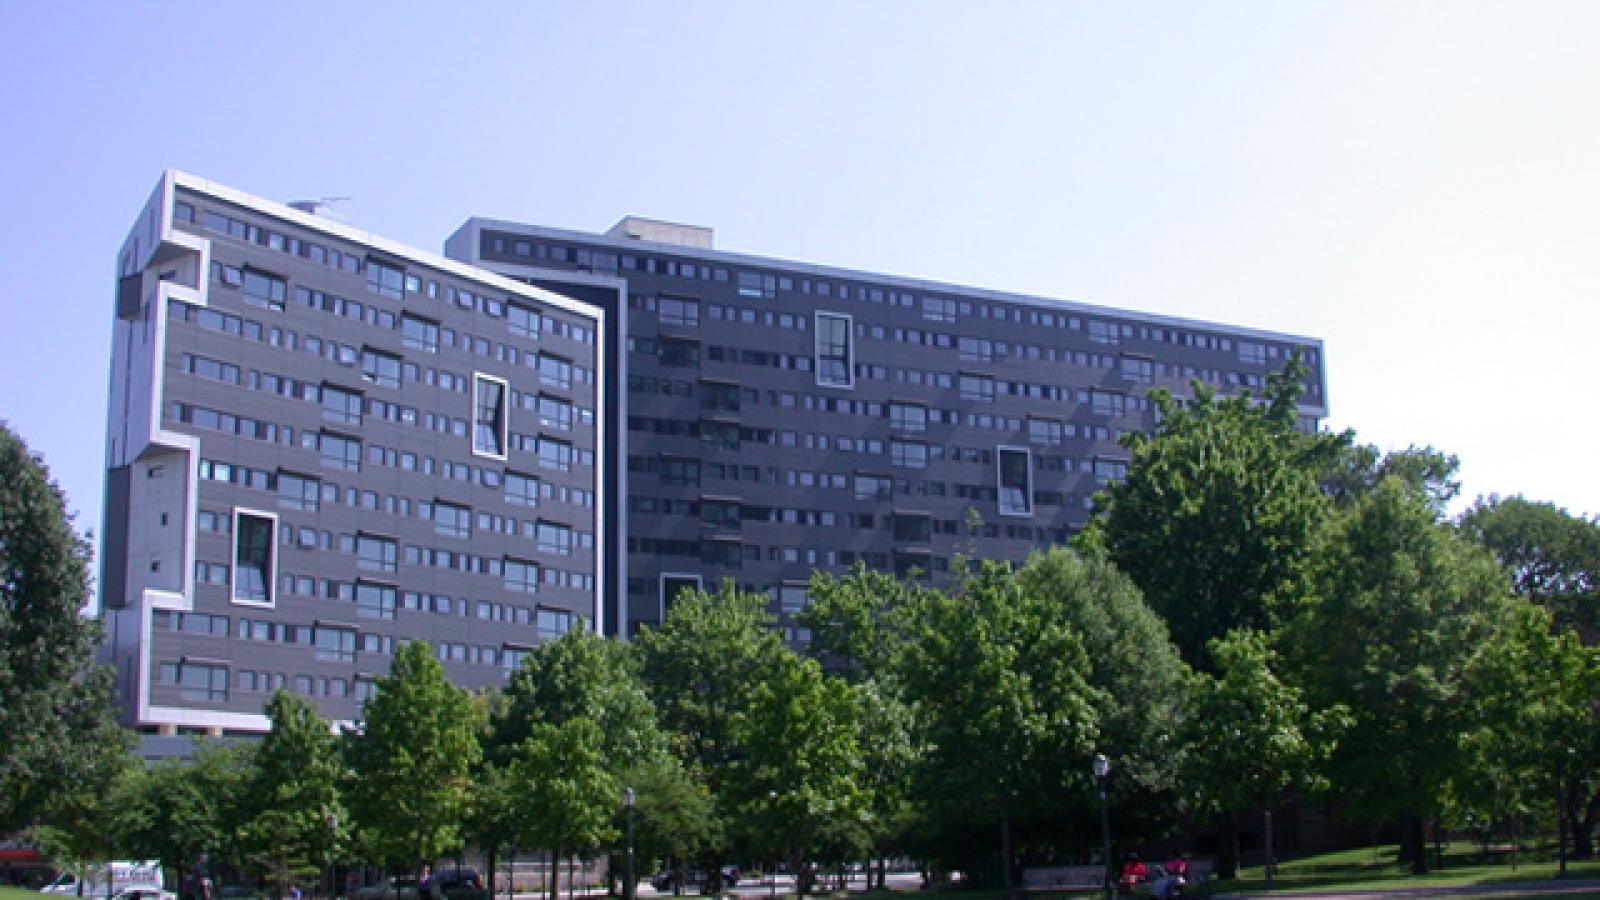 The Radian building